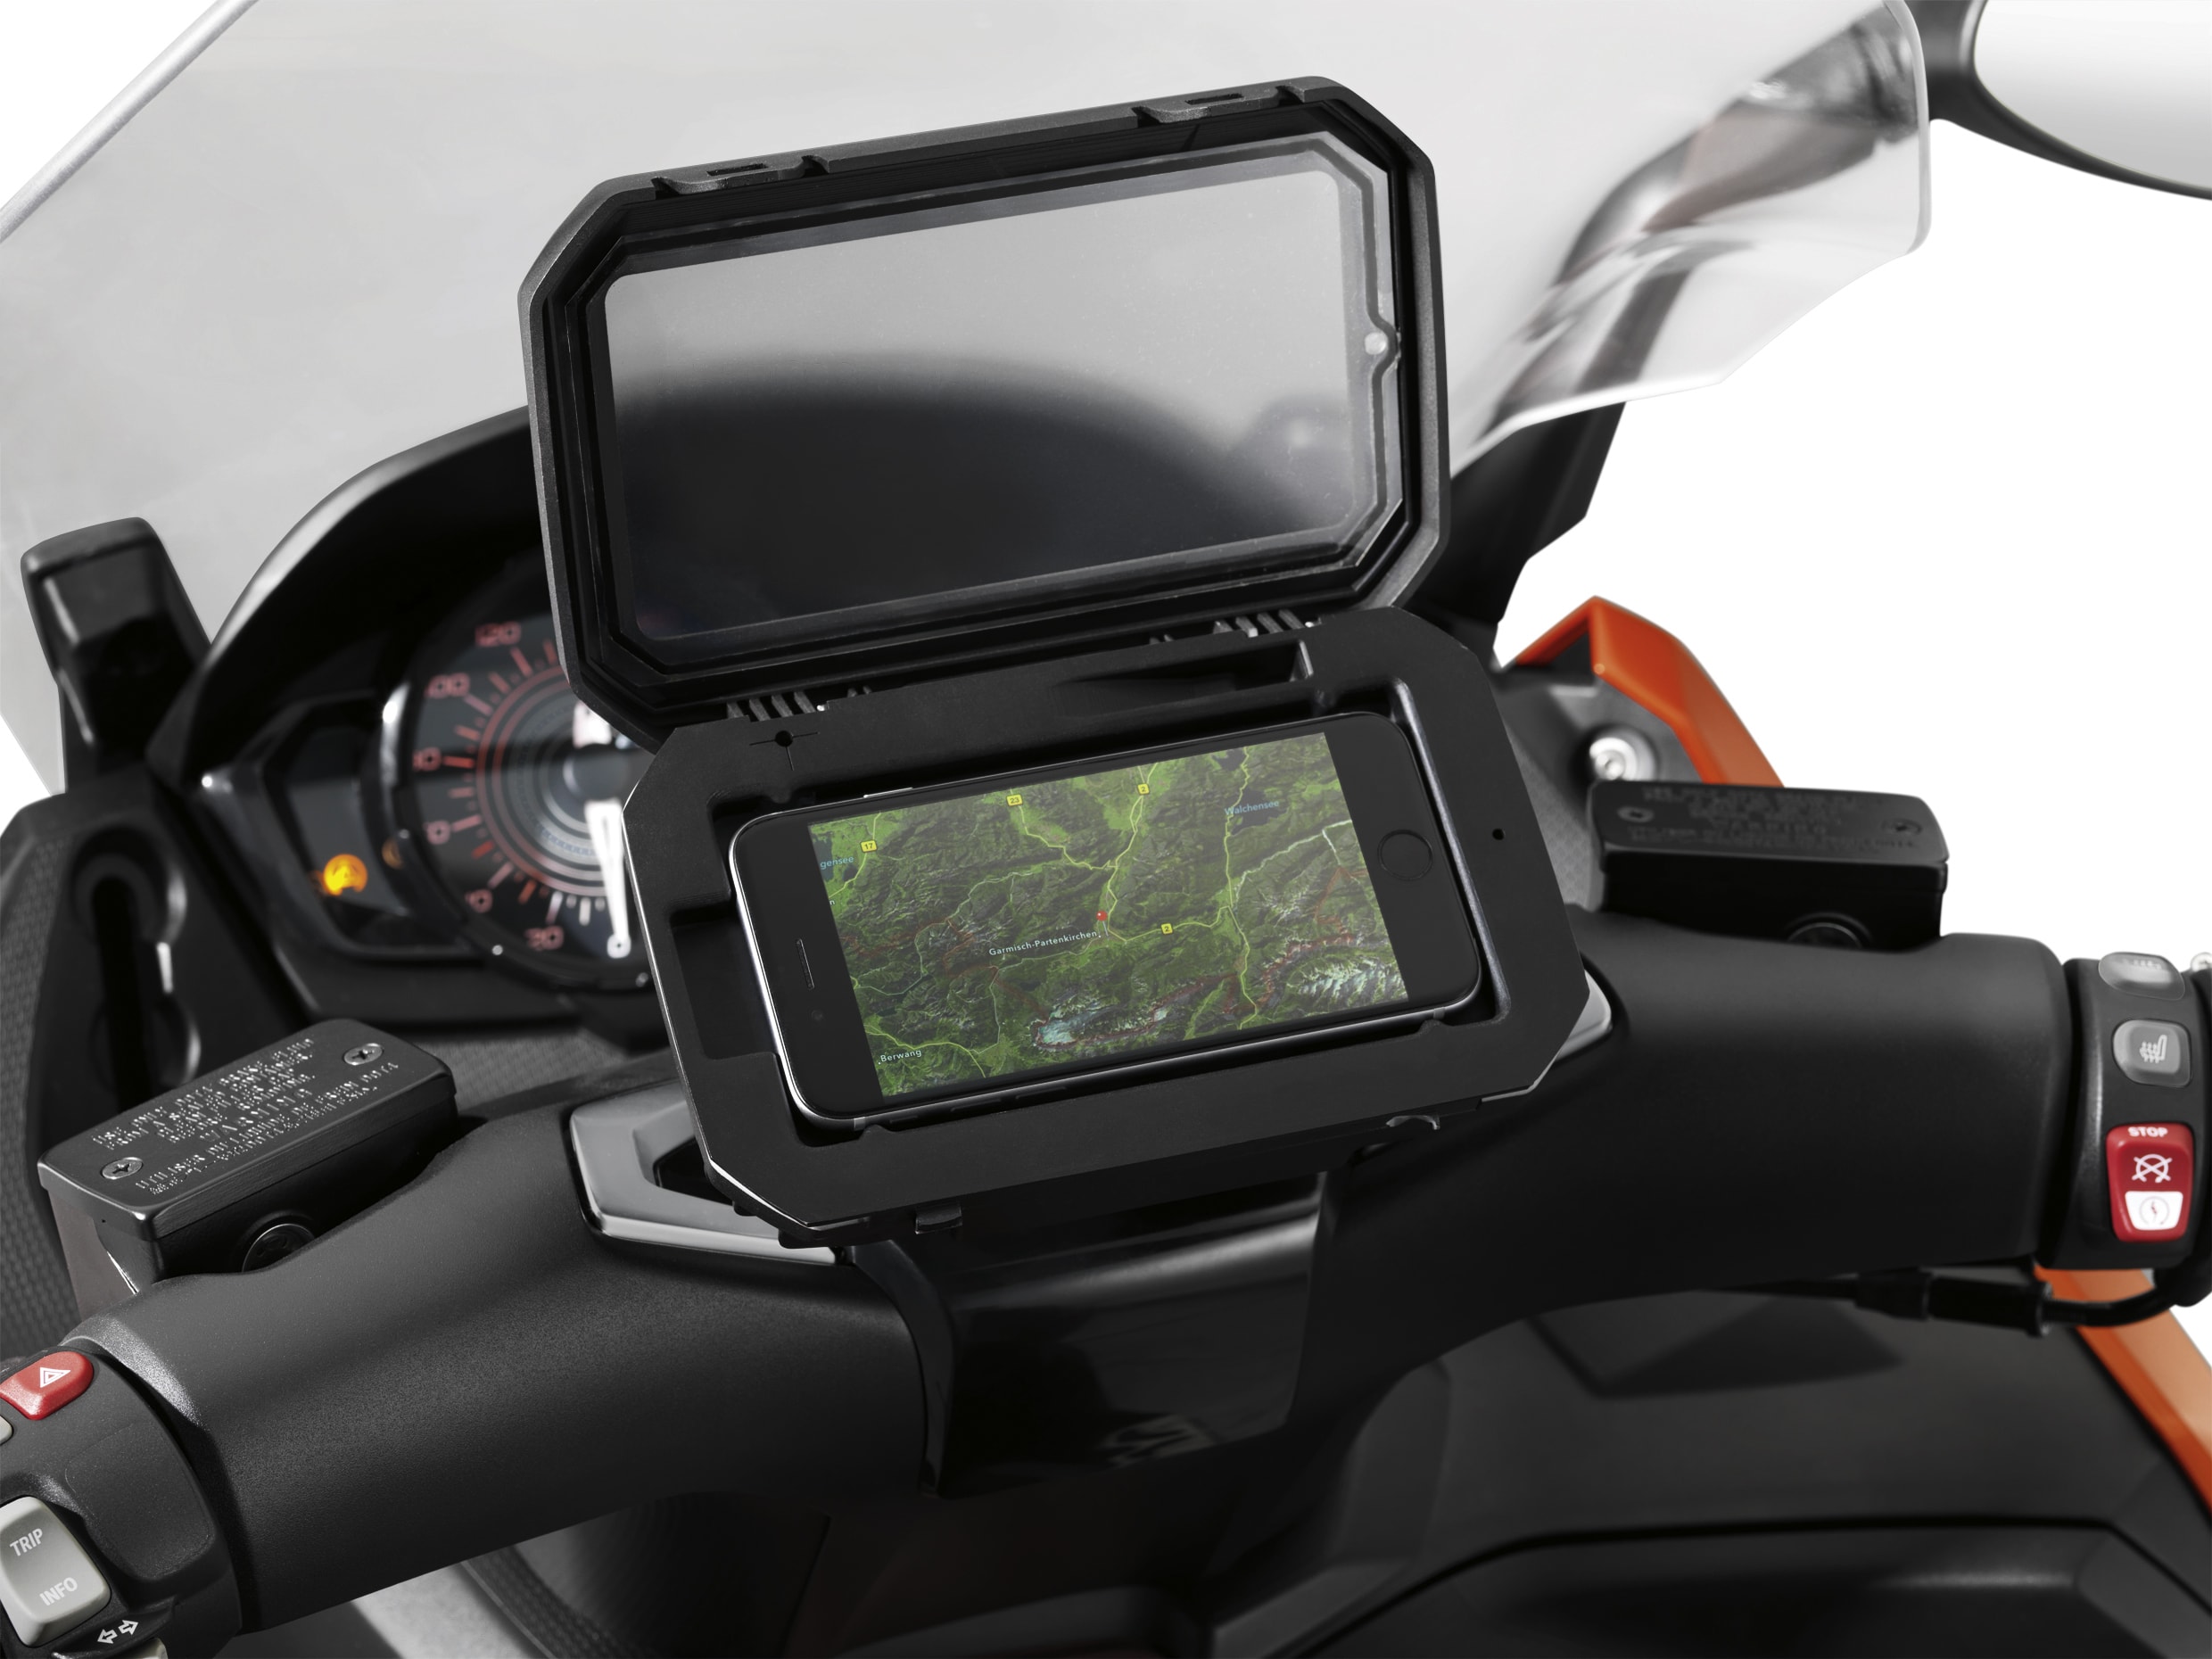 The Bmw Motorrad Smartphone Cradle Is Outrageously Expensive Autoevolution